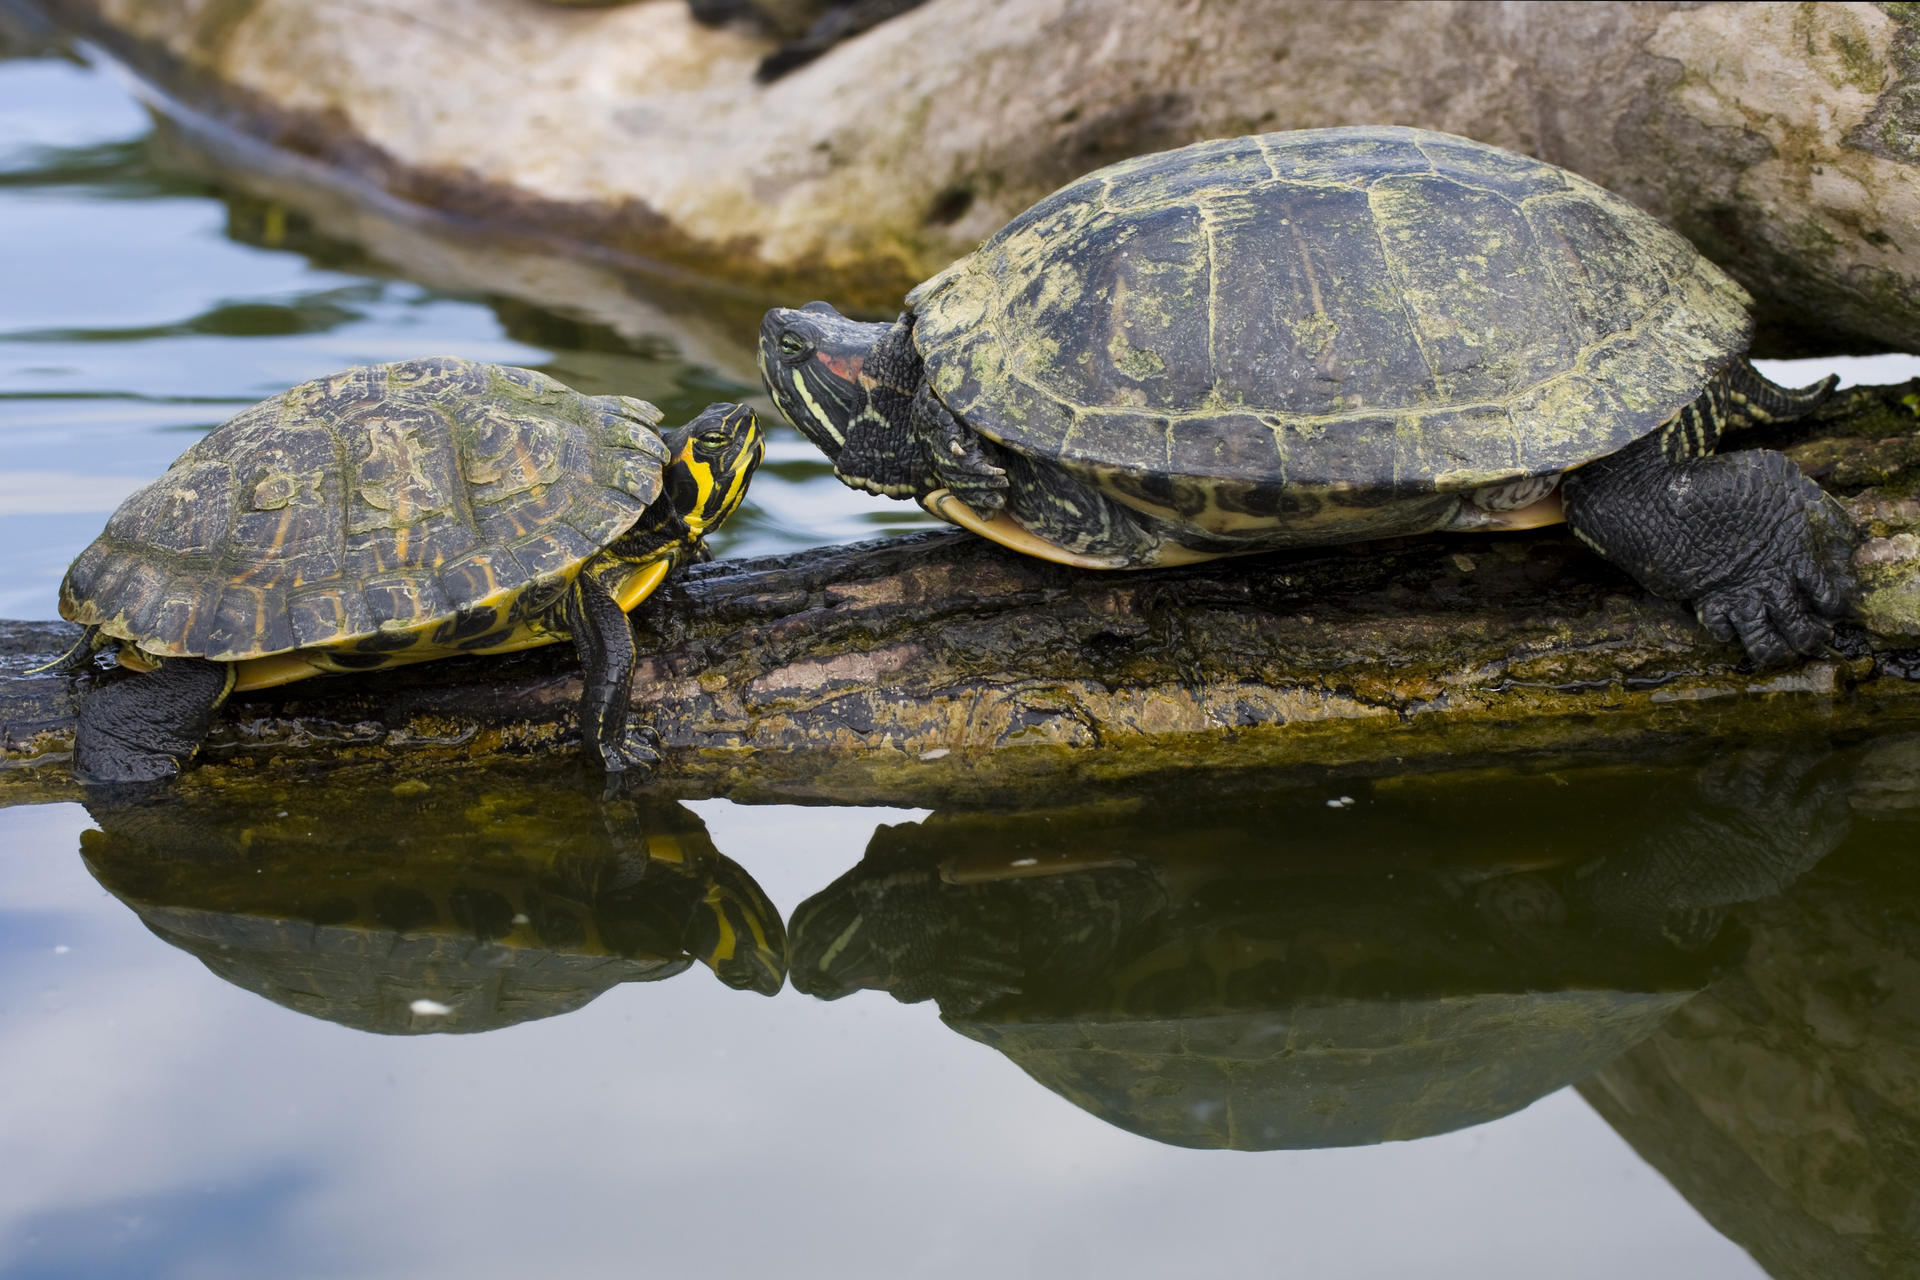 Red-eared sliders are among the most popular pet turtle species in Hong Kong. Photos: Thinkstock